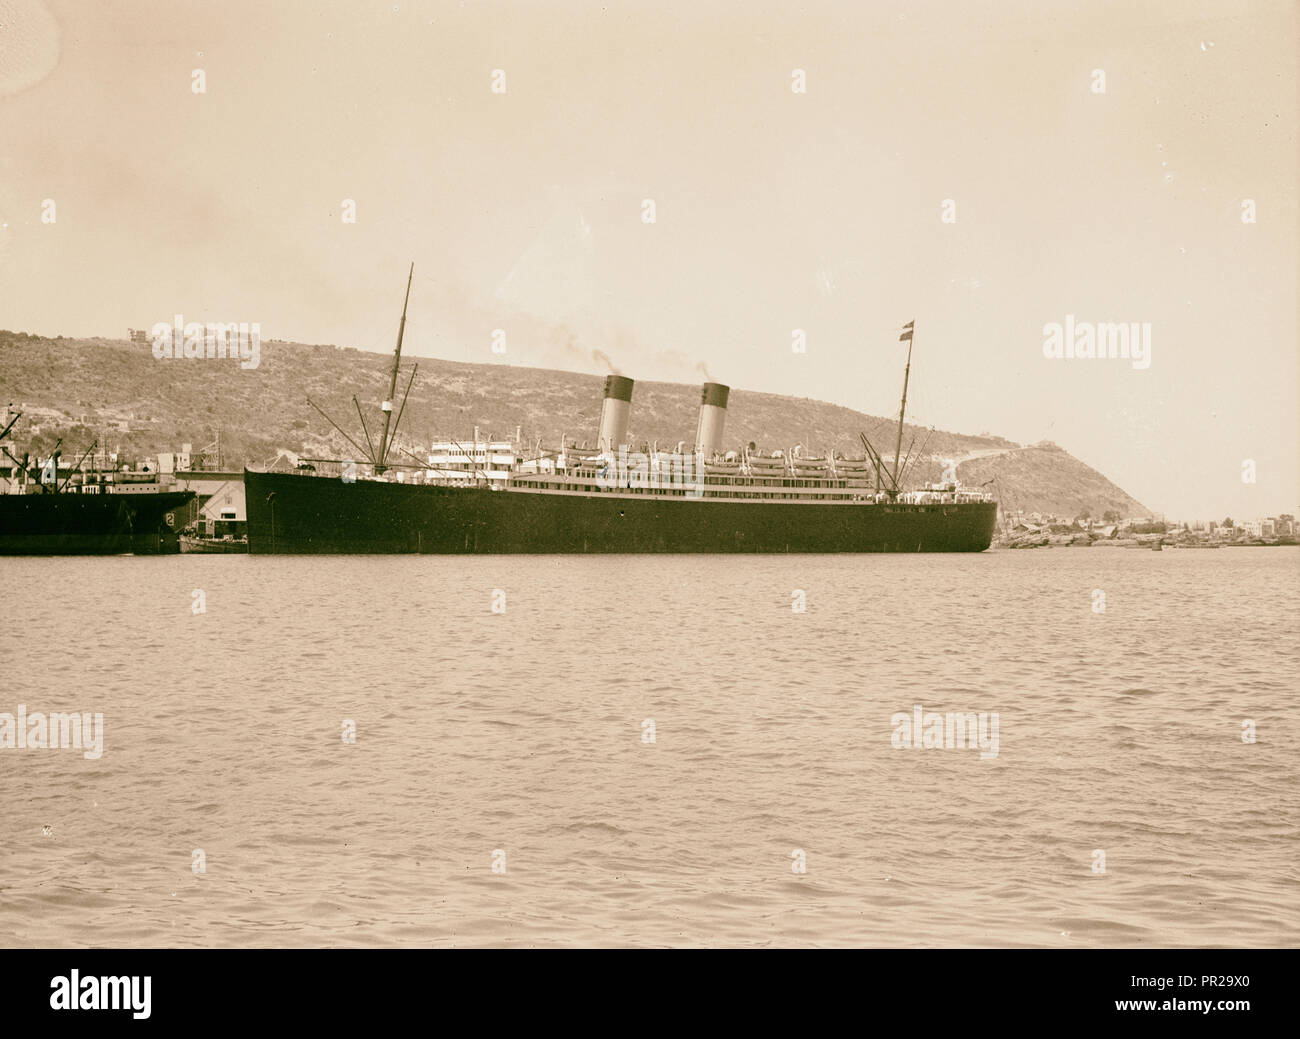 Palestine disturbances 1936. The luxury liner Laurentic docked in Haifa. Mt. Carmel is conspicuously seen in the background Stock Photo